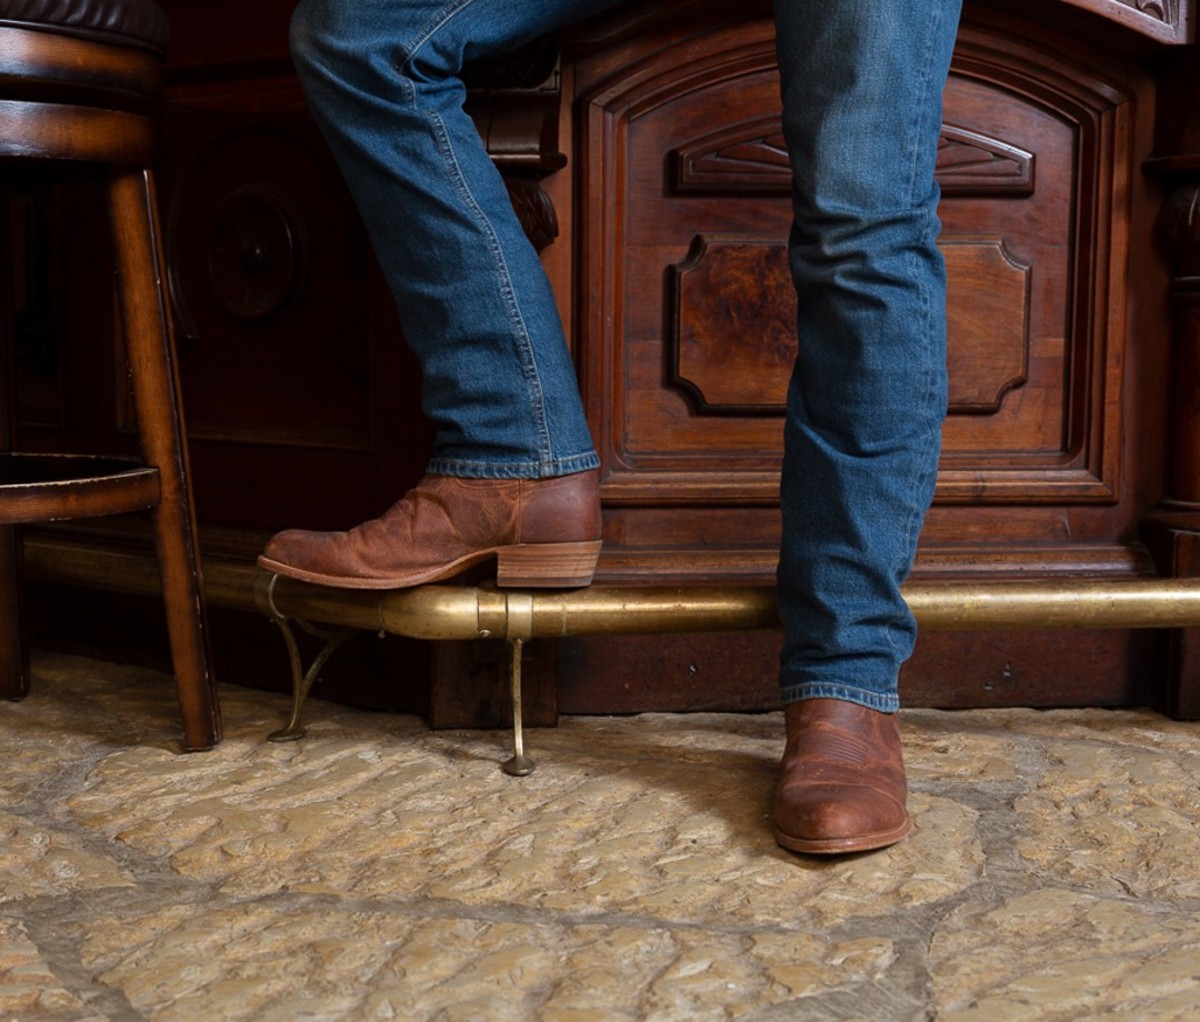 Legs of men in denim and brown boots standing in front of the bar